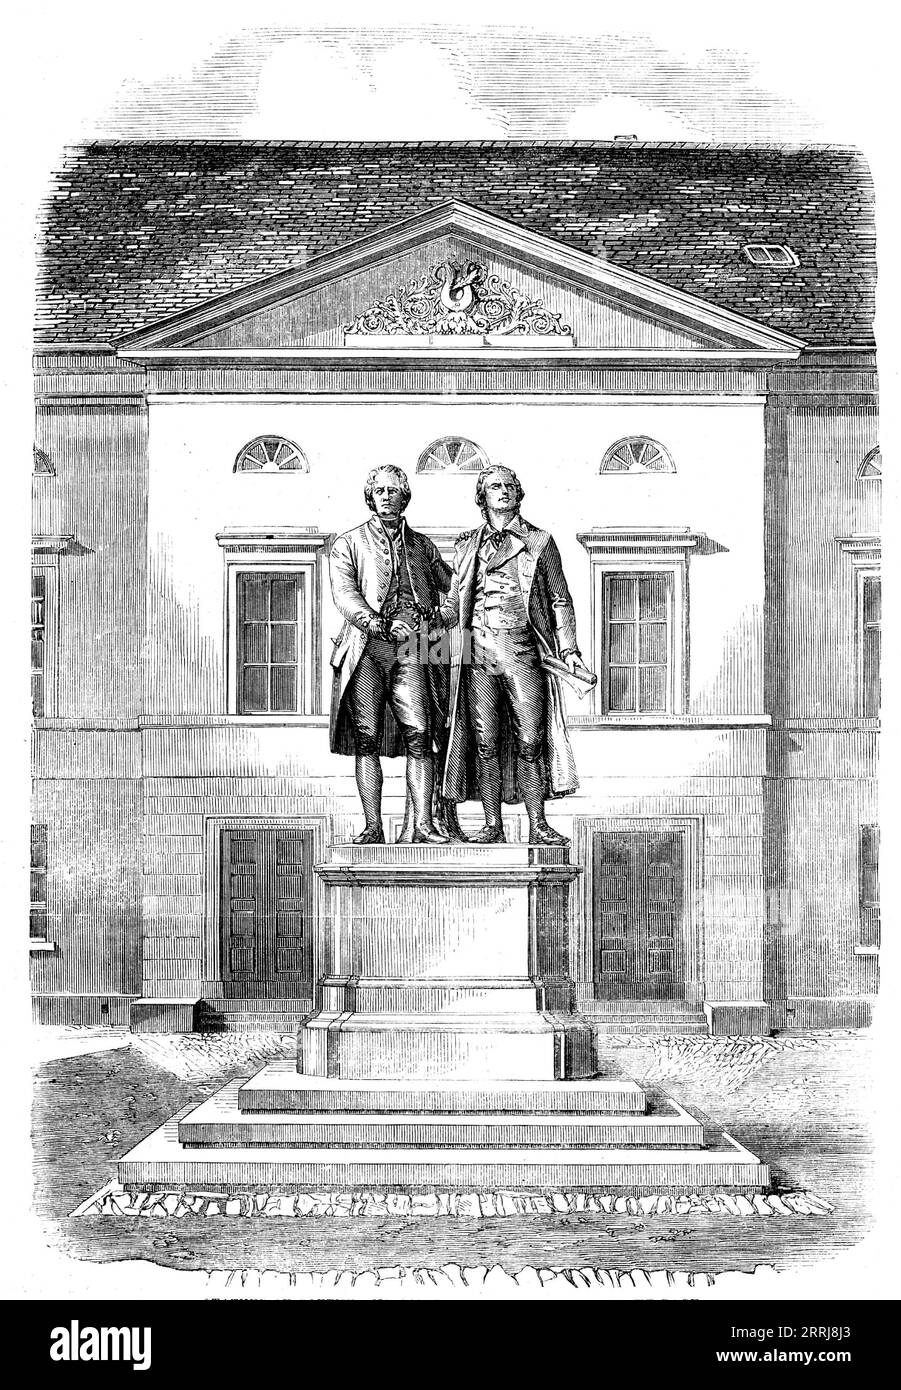 Statues of Goethe and Schiller at Weimar, 1858. Sculpture of German writers and dramatists Johann Wolfgang von Goethe and Friedrich Schiller. 'Rietschel, the Dresden sculptor, who was selected to execute these statues, has appropriately represented them grasping the same crown of laurel. This work added greatly to the fame of the artist, and earned for the him the Cross of a Commander of the Order of the Falcon'. From &quot;Illustrated London News&quot;, 1858. Stock Photo